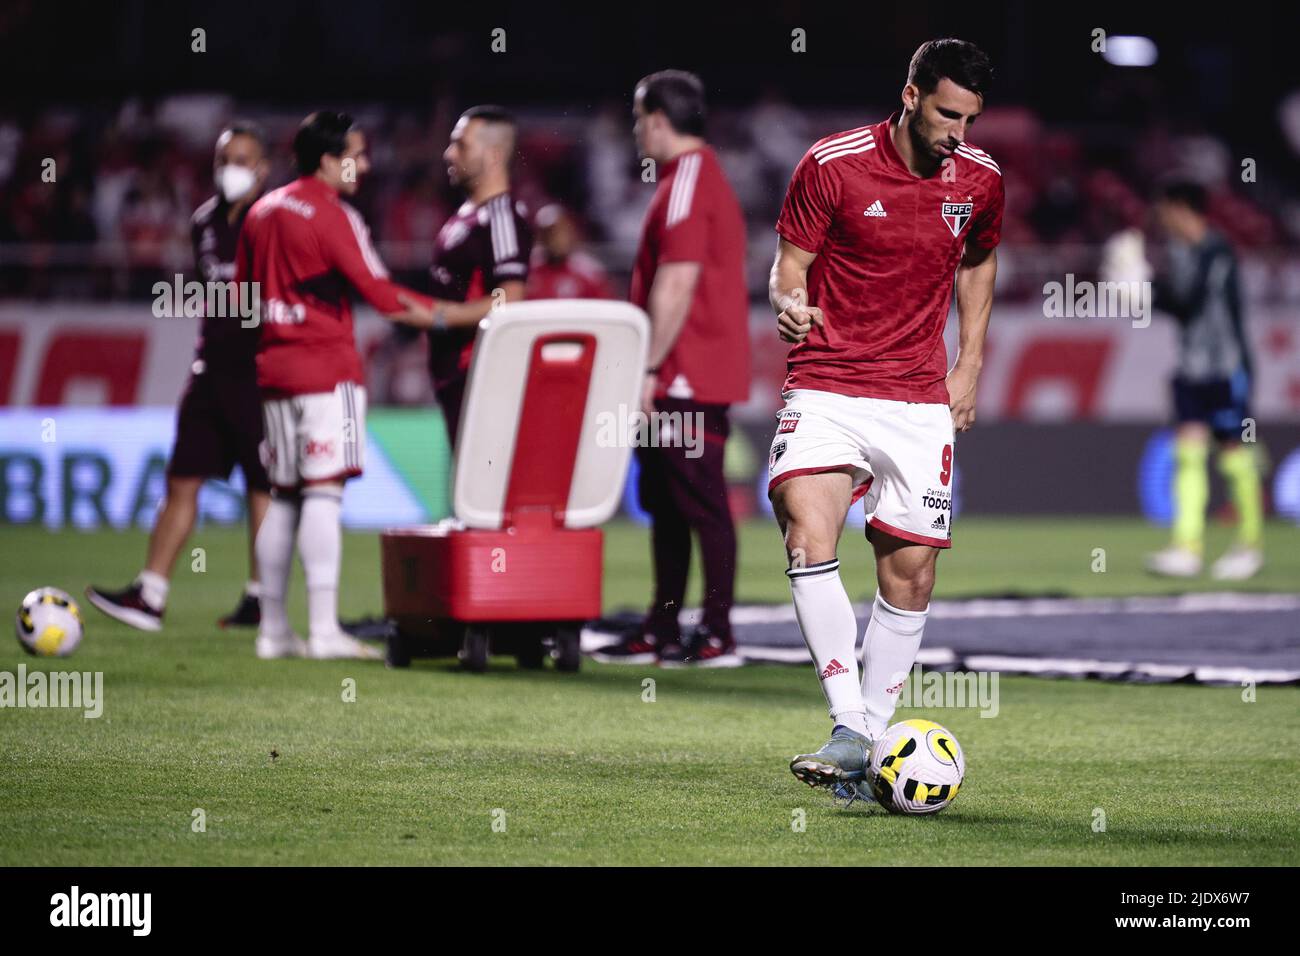 Calleri of Sao Paulo looks on during a match between Sao Paulo and